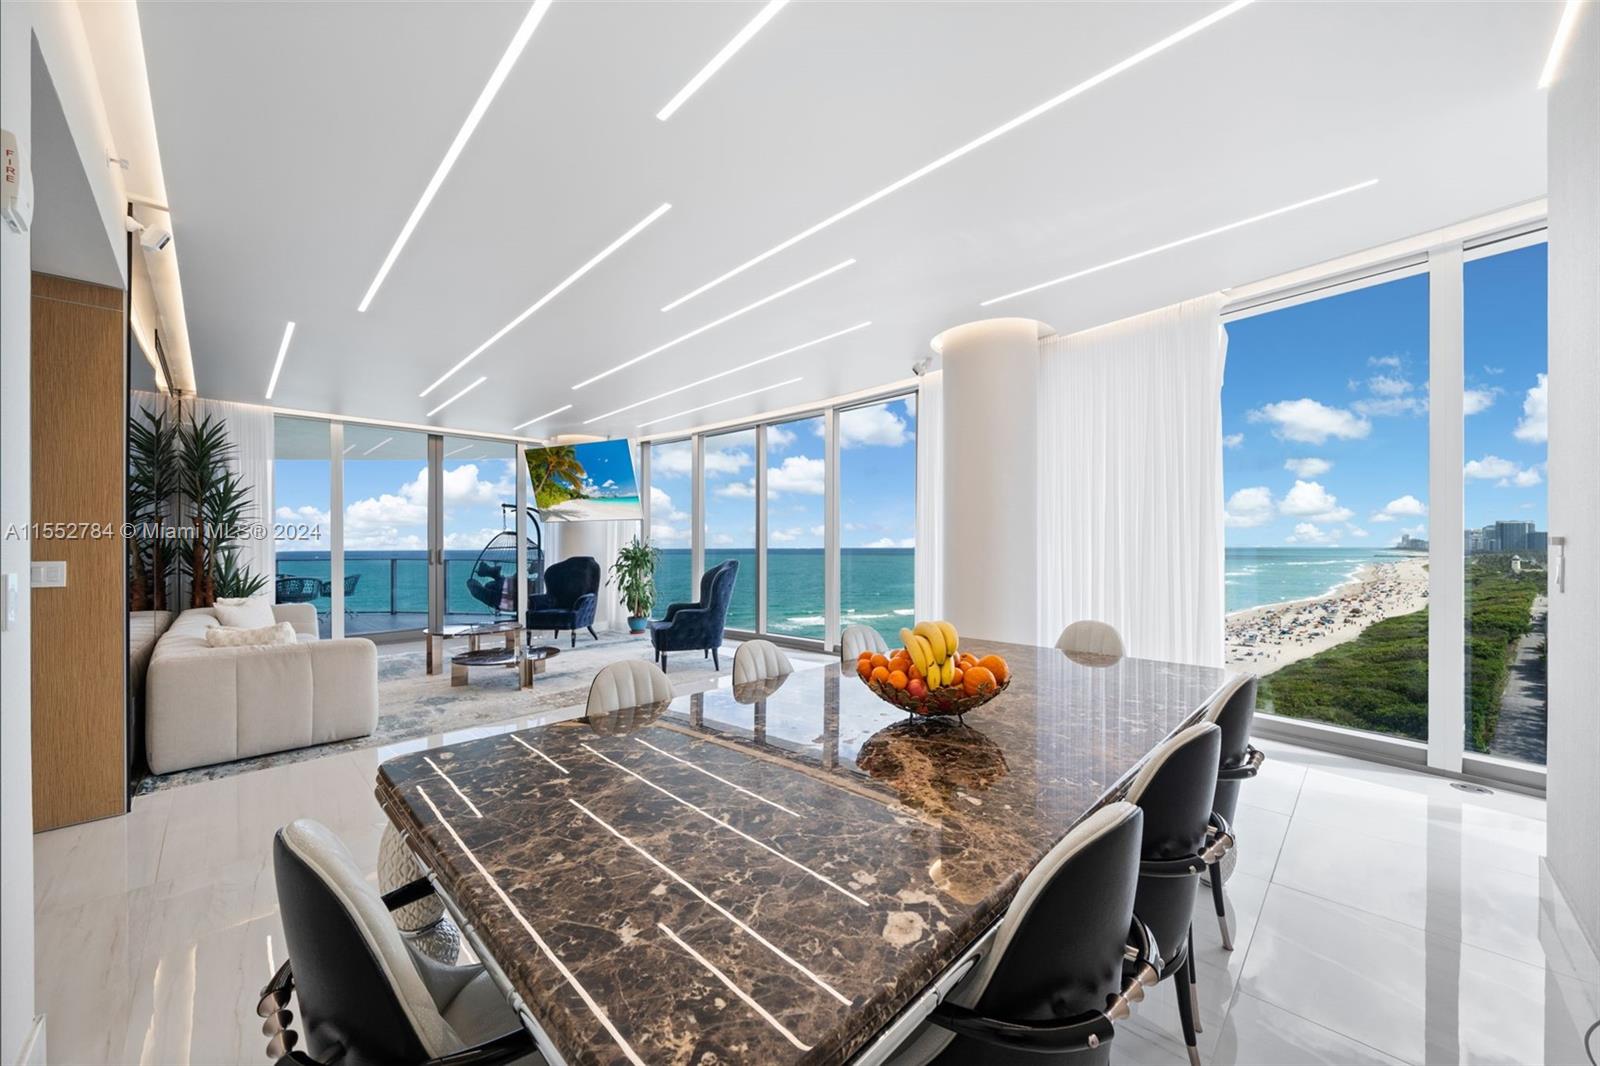 Most desirable southeast corner unit at the Ritz Carlton Residences. First floor to clear the building next door, offering gorgeous natural light and unobstructed ocean, intracoastal and skyline views. This 4-bedroom + maid quarters and 5.5-bathroom residence totals 3,640 SF (per developer). Meticulously finished with the most intricate details – Velum illuminated stretch ceilings, Italian wallpaper & tile, high-end closet buildouts, automated window treatments. Private elevator landing and 4 balconies. Amenities include 2 pools, spa, gym, beach/pool service, restaurant/bar, room service, club level lounge, valet, 24-hour concierge. Unit comes with 2 valet spaces and one deeded space. Buyer has an option to purchase up to THREE more deeded spaces from the seller. Furniture negotiable.